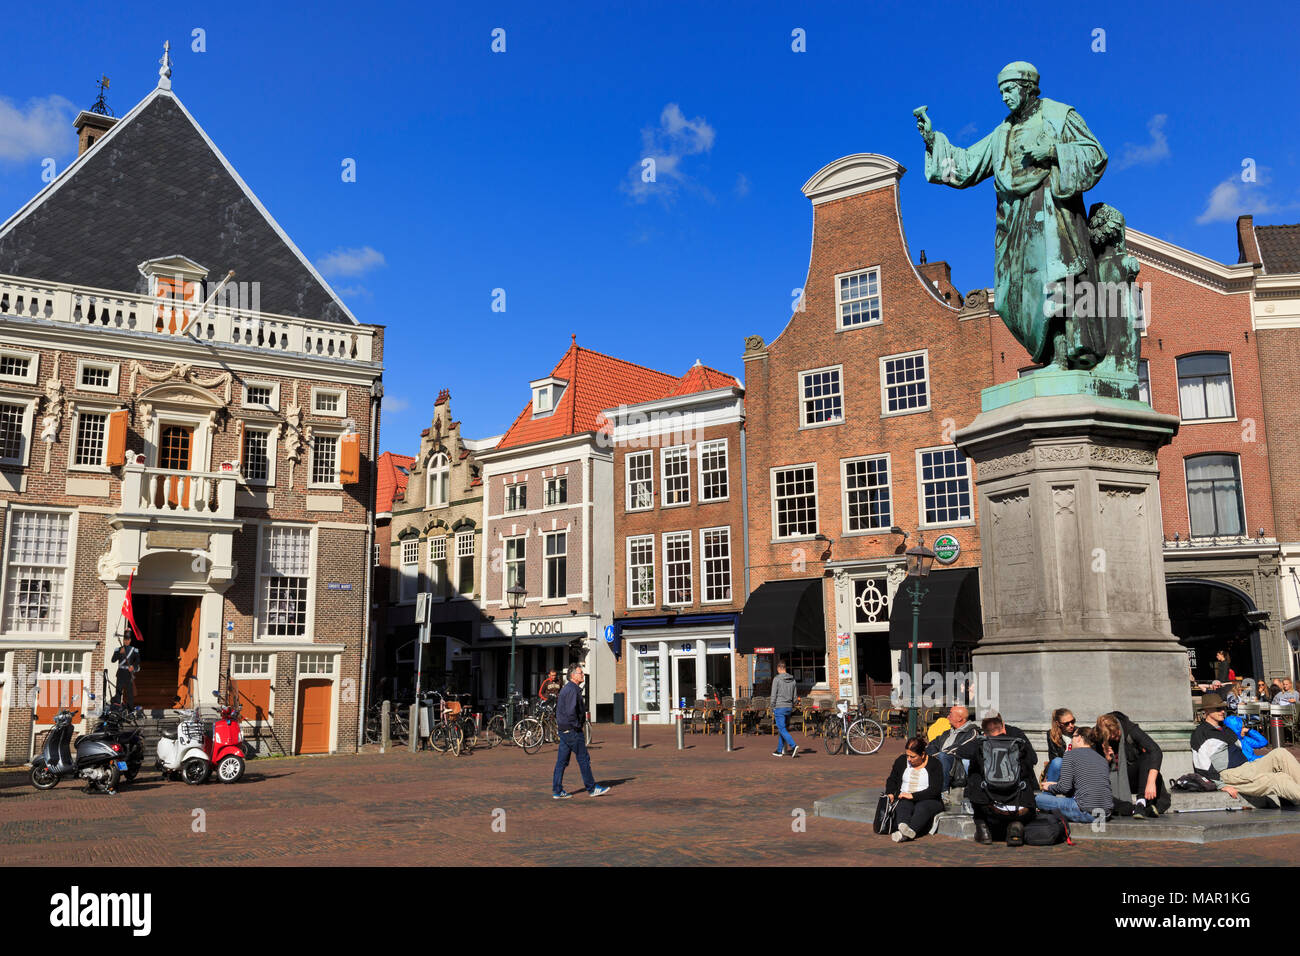 Statue of Laurens Janszoon Coster, Grote Markt (Central Square), Haarlem, Netherlands, Europe Stock Photo